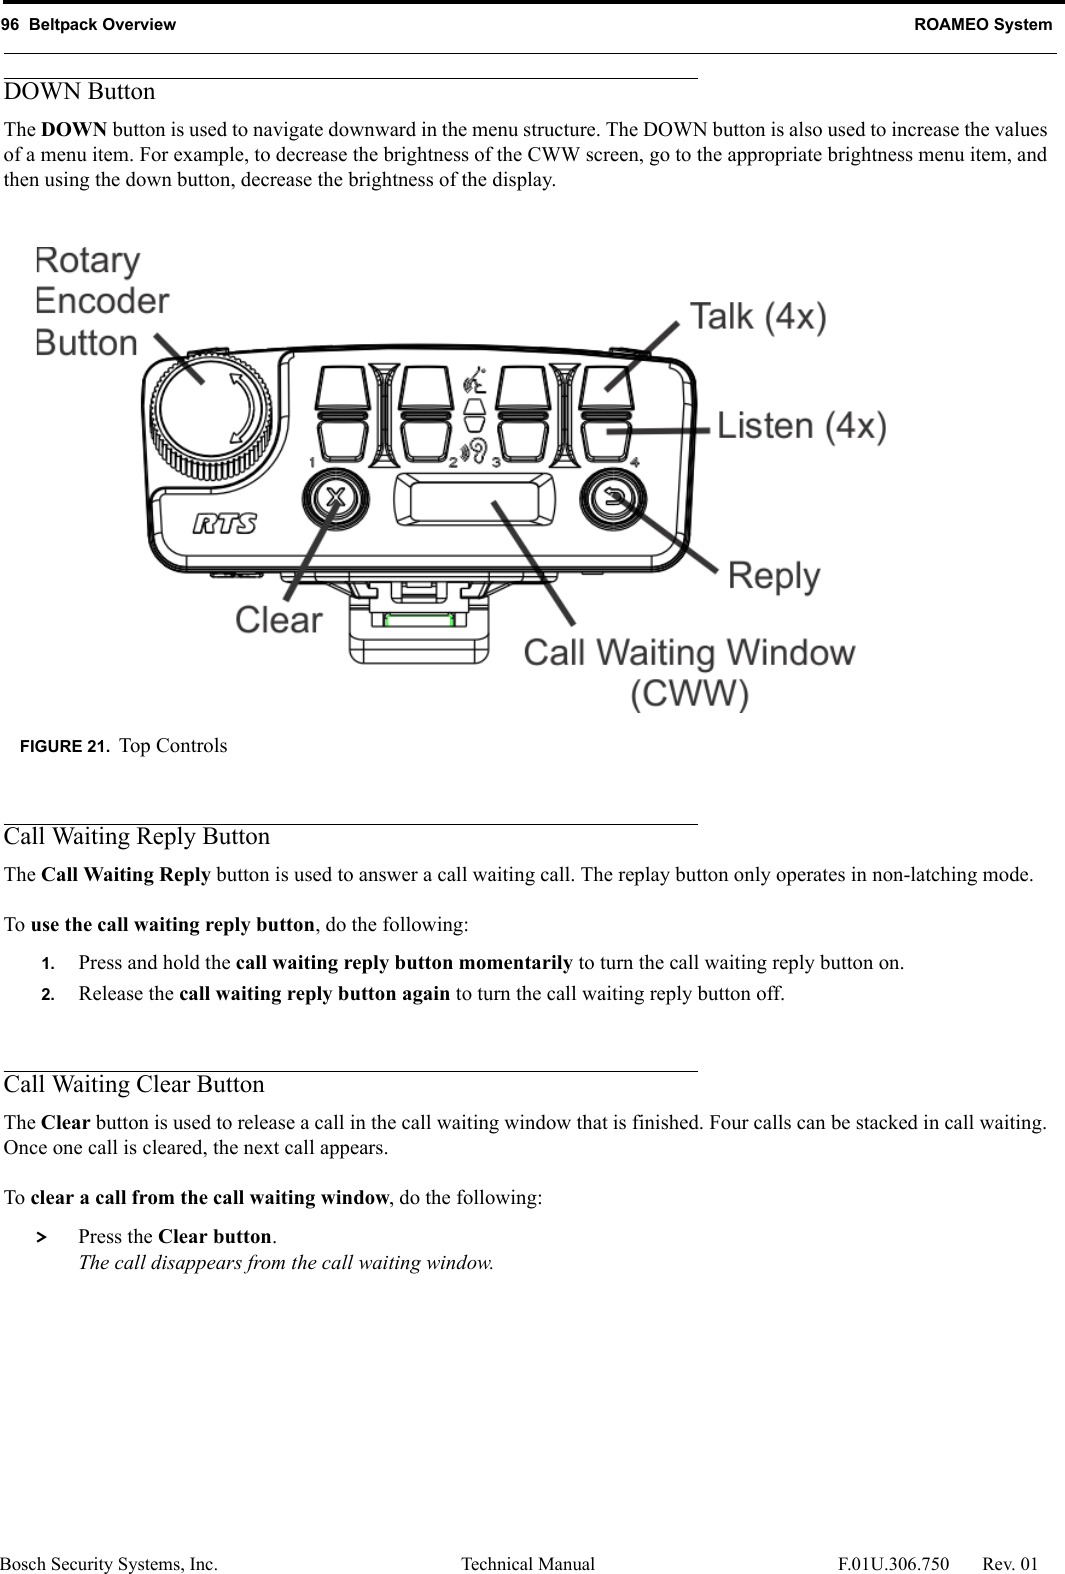 96  Beltpack Overview ROAMEO SystemBosch Security Systems, Inc. Technical Manual  F.01U.306.750 Rev. 01DOWN ButtonThe DOWN button is used to navigate downward in the menu structure. The DOWN button is also used to increase the values of a menu item. For example, to decrease the brightness of the CWW screen, go to the appropriate brightness menu item, and then using the down button, decrease the brightness of the display. Call Waiting Reply ButtonThe Call Waiting Reply button is used to answer a call waiting call. The replay button only operates in non-latching mode.To use the call waiting reply button, do the following:1. Press and hold the call waiting reply button momentarily to turn the call waiting reply button on.2. Release the call waiting reply button again to turn the call waiting reply button off.Call Waiting Clear ButtonThe Clear button is used to release a call in the call waiting window that is finished. Four calls can be stacked in call waiting. Once one call is cleared, the next call appears.To clear a call from the call waiting window, do the following: &gt; Press the Clear button.The call disappears from the call waiting window.FIGURE 21. Top Controls